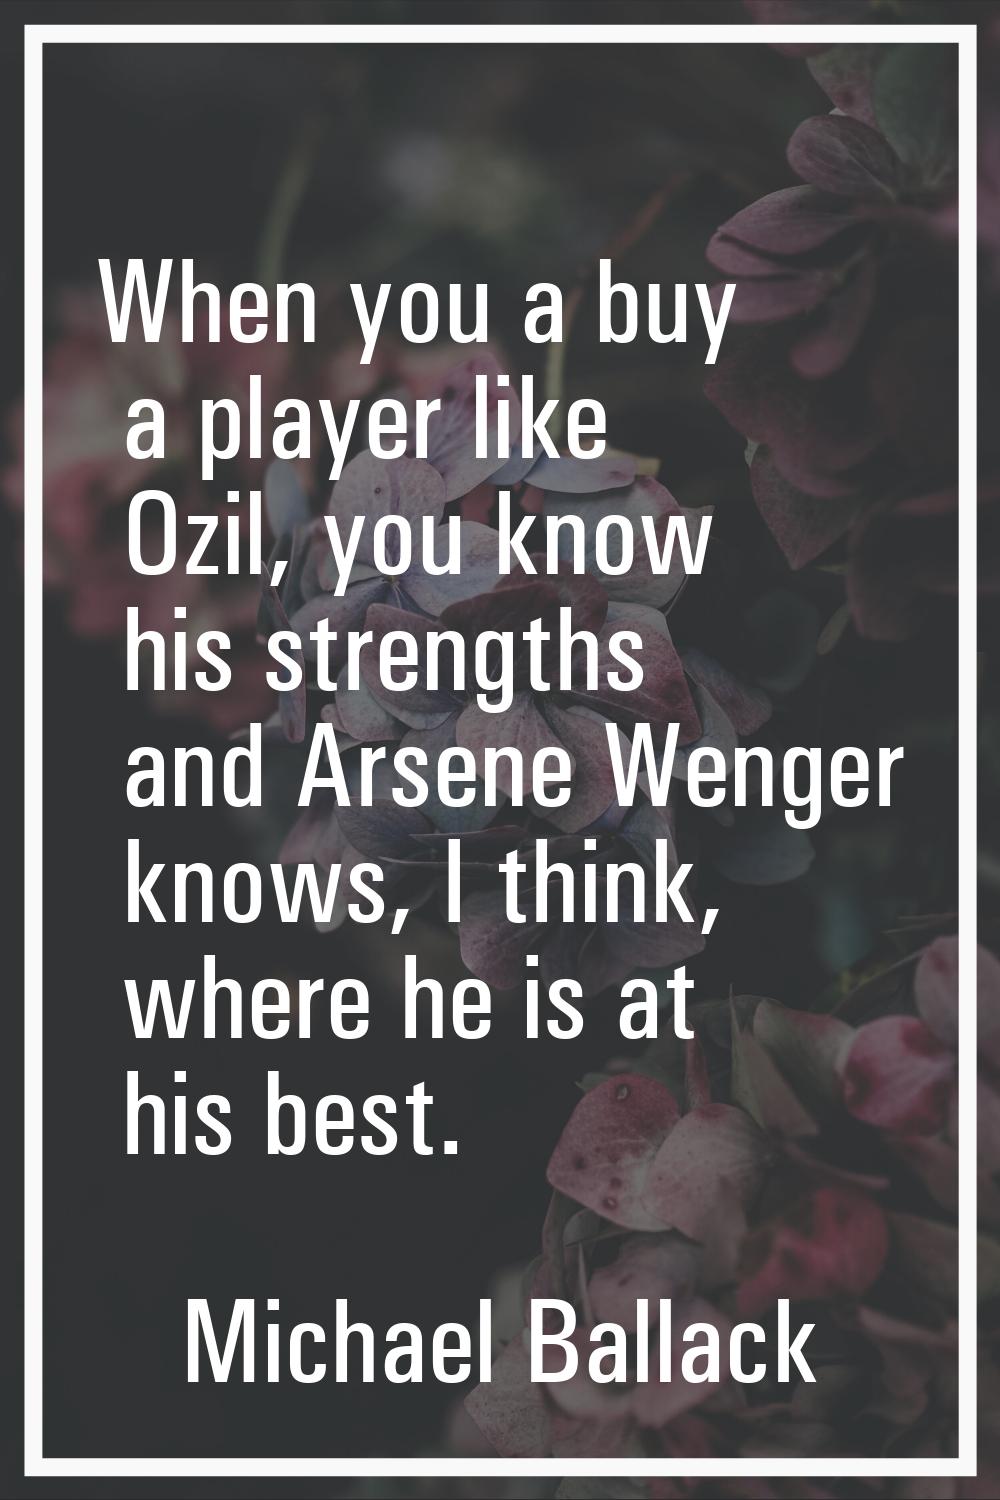 When you a buy a player like Ozil, you know his strengths and Arsene Wenger knows, I think, where h